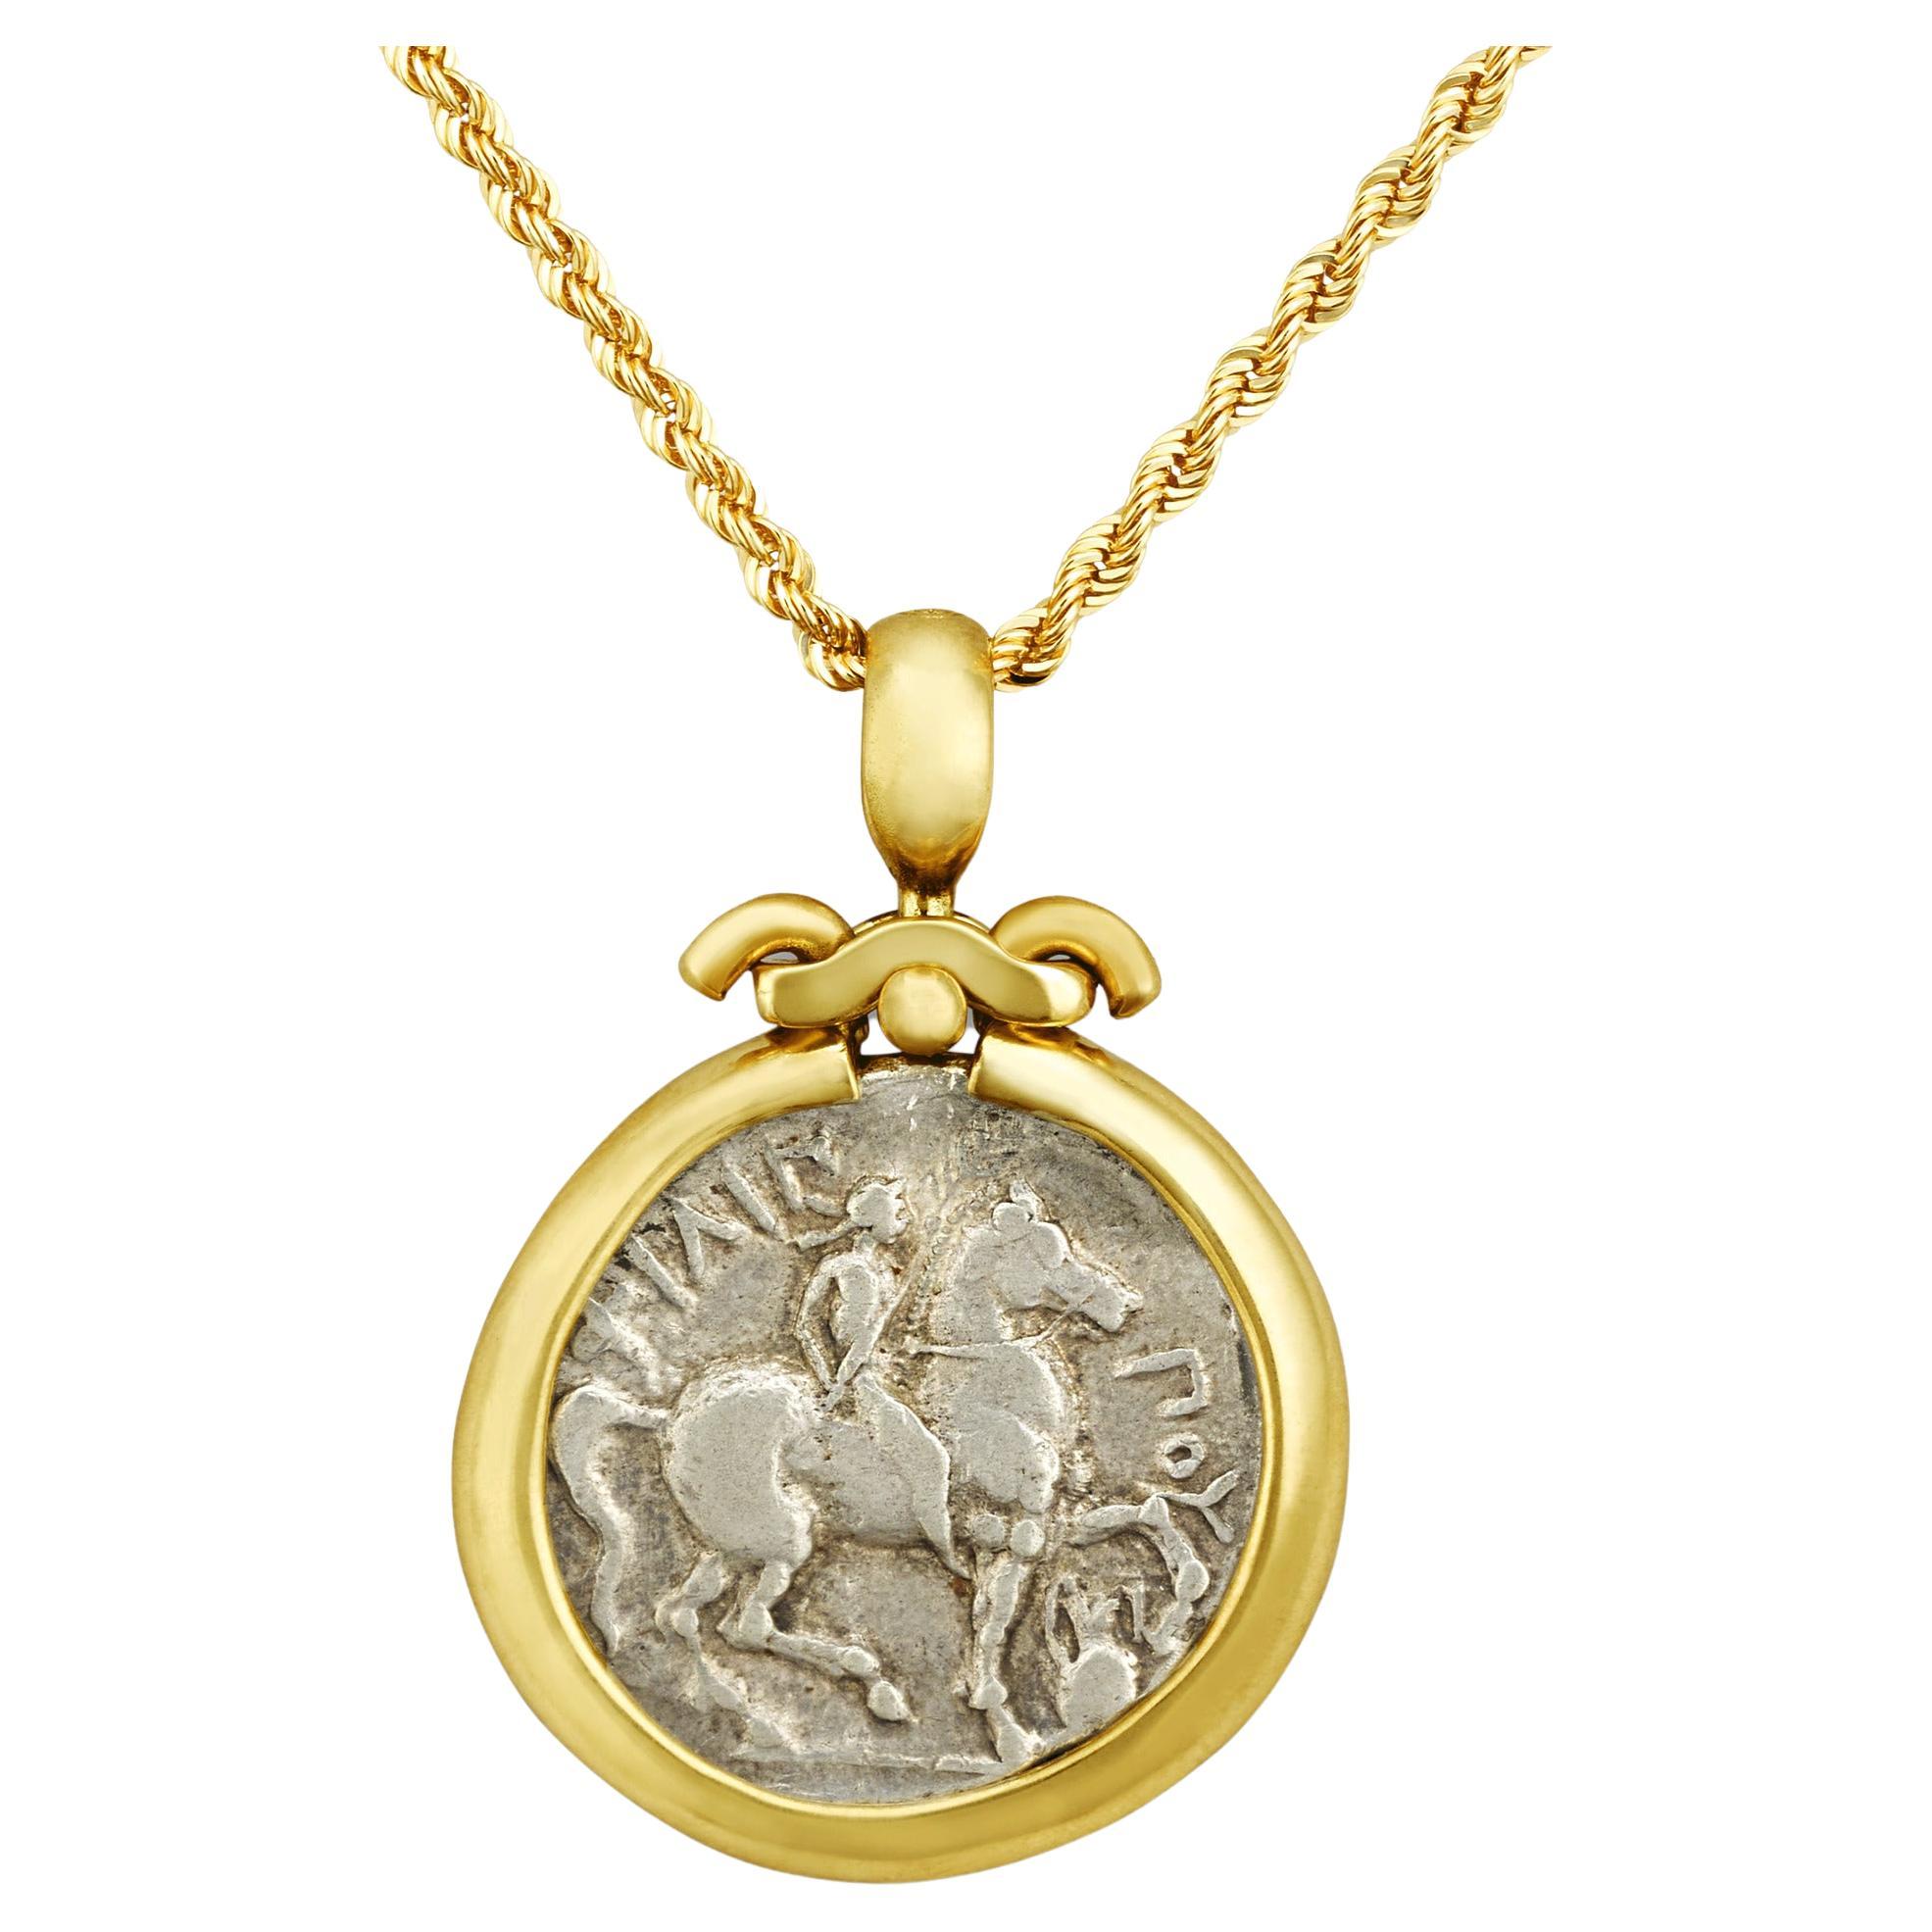 Ancient Macedonian Coin Necklace